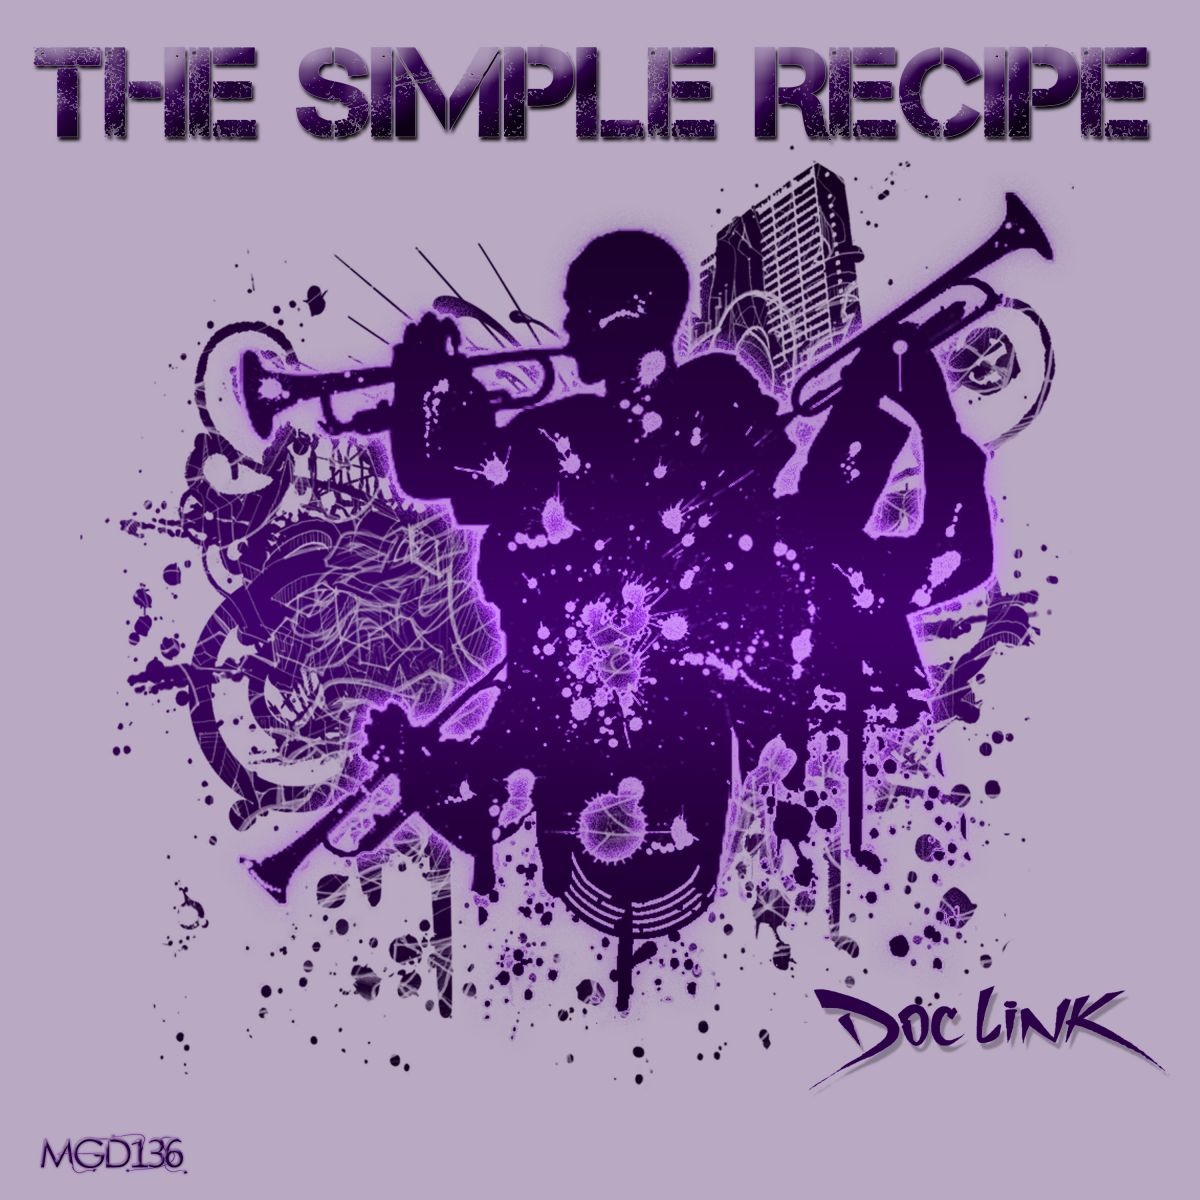 Doc Link - The Simple Recipe / Modulate Goes Digital